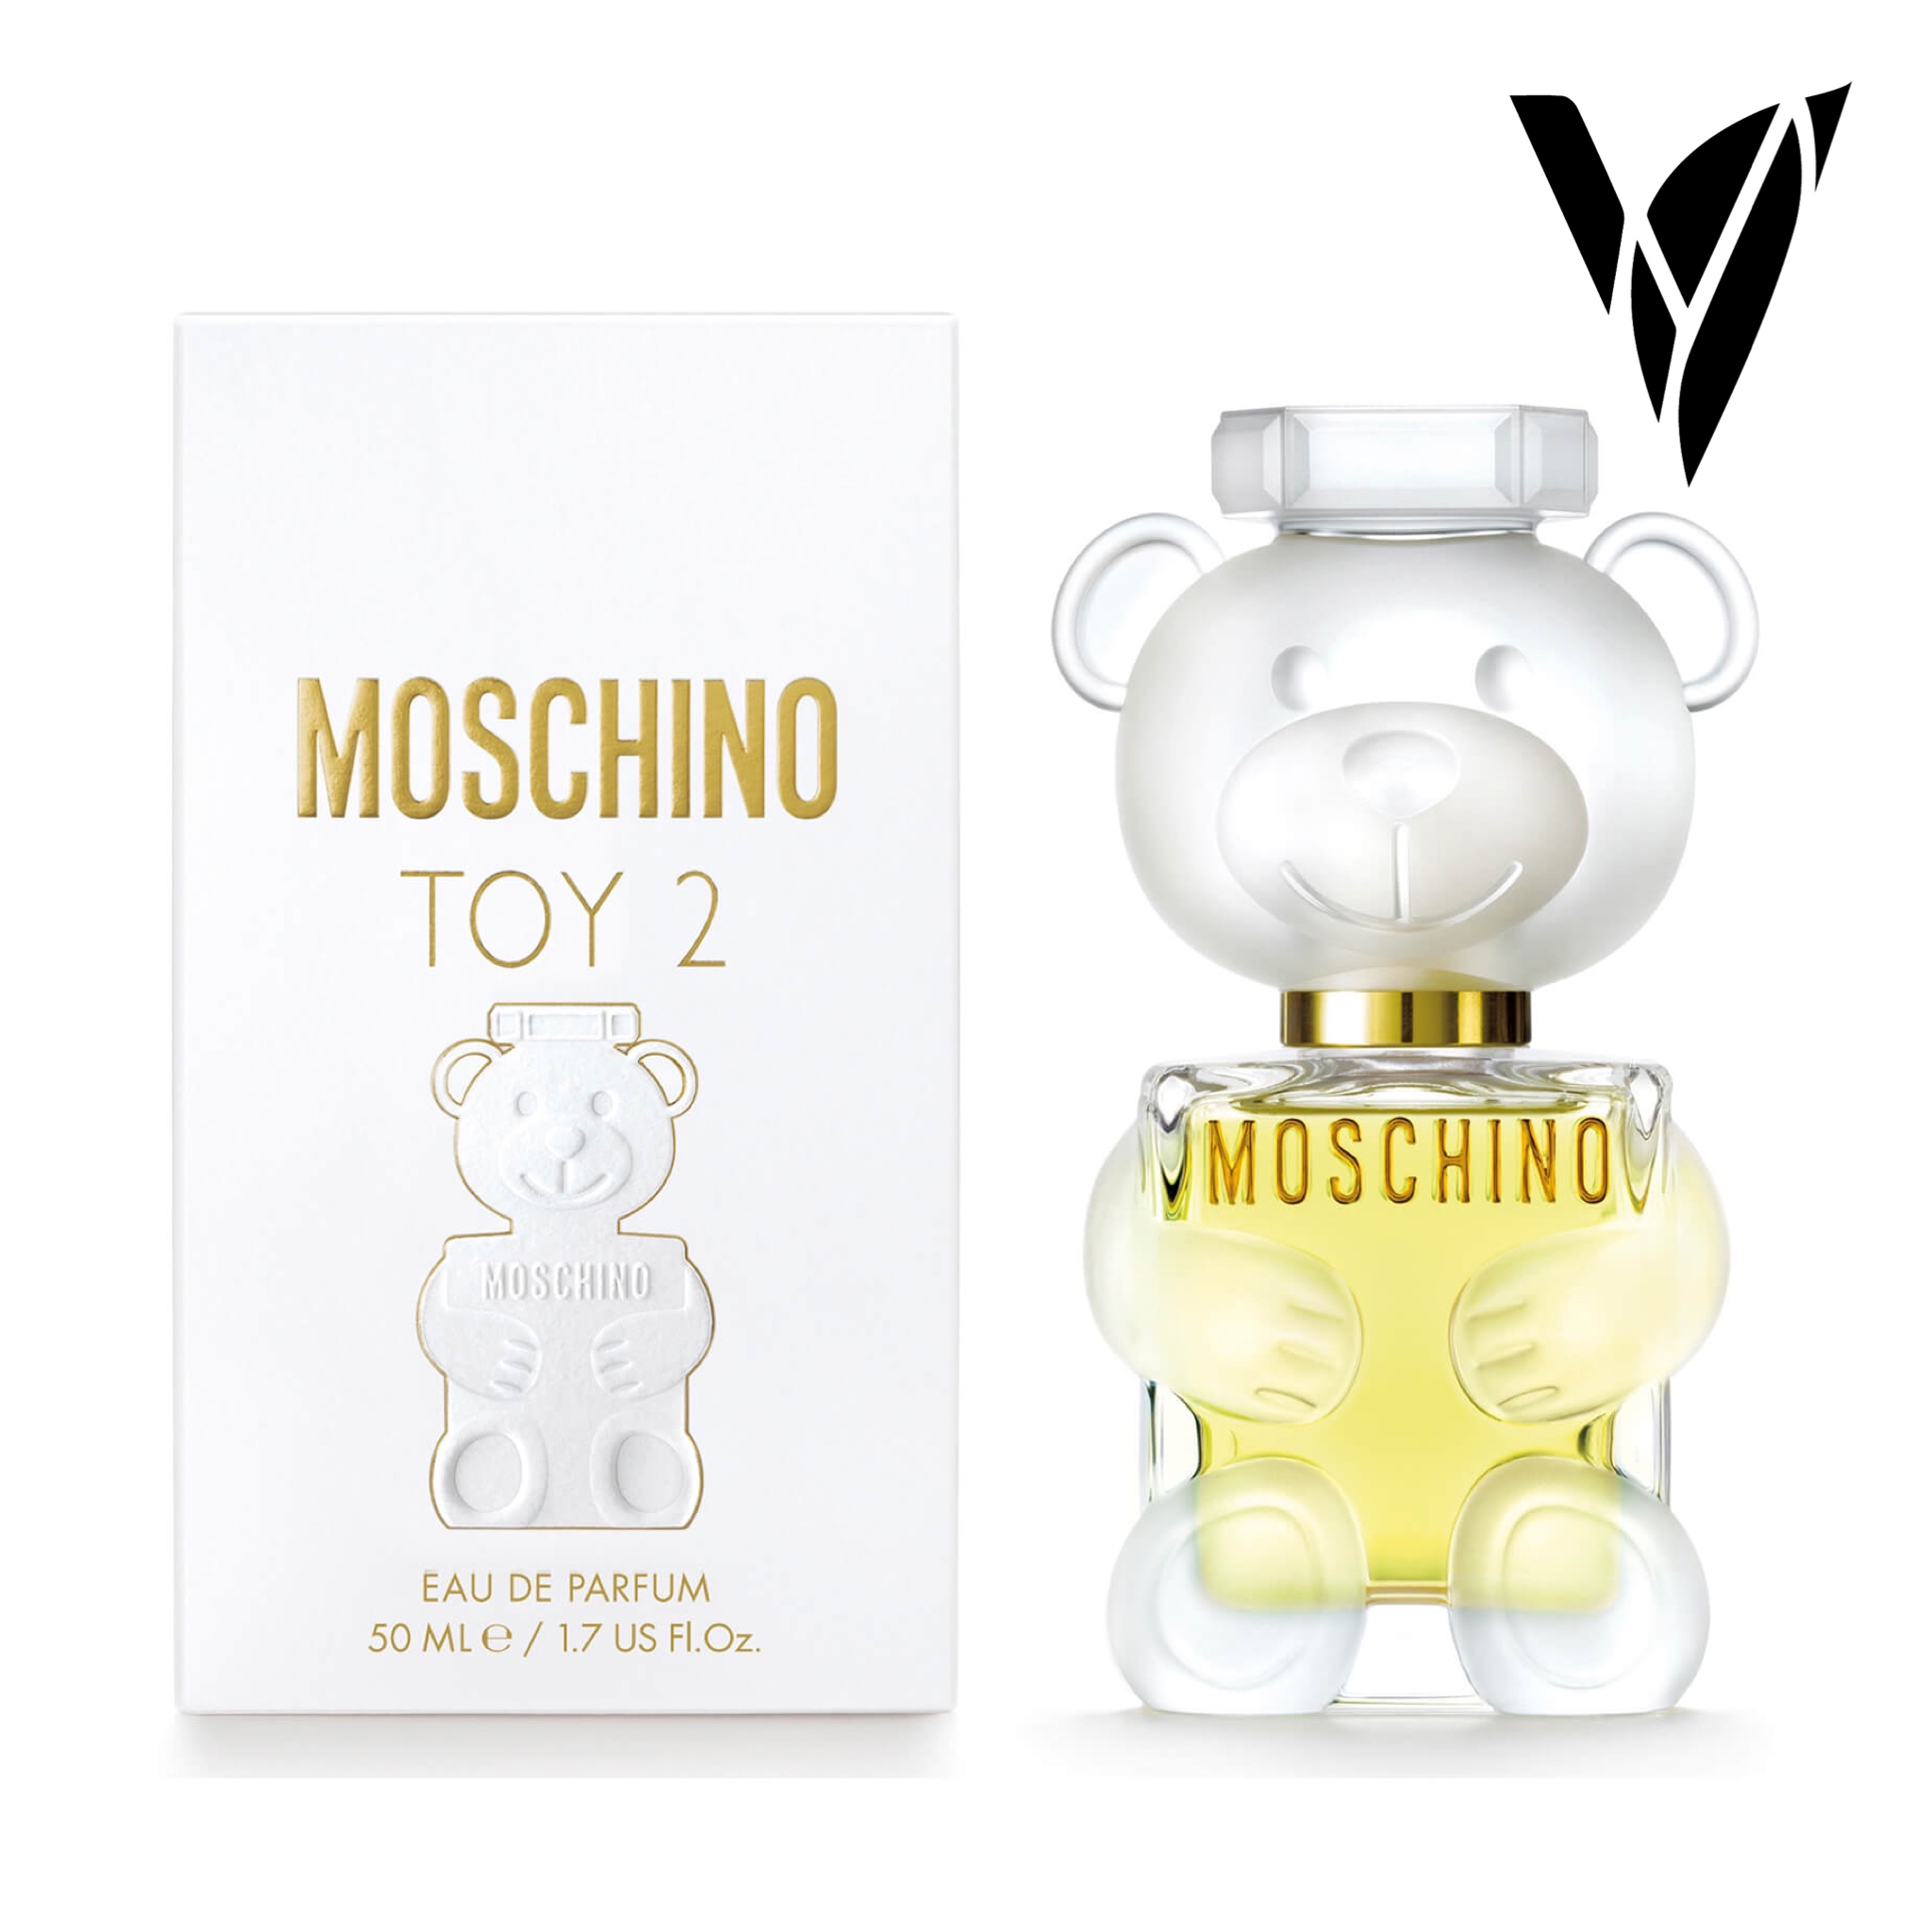 Toy 2 Moschino 1.1 + Decant